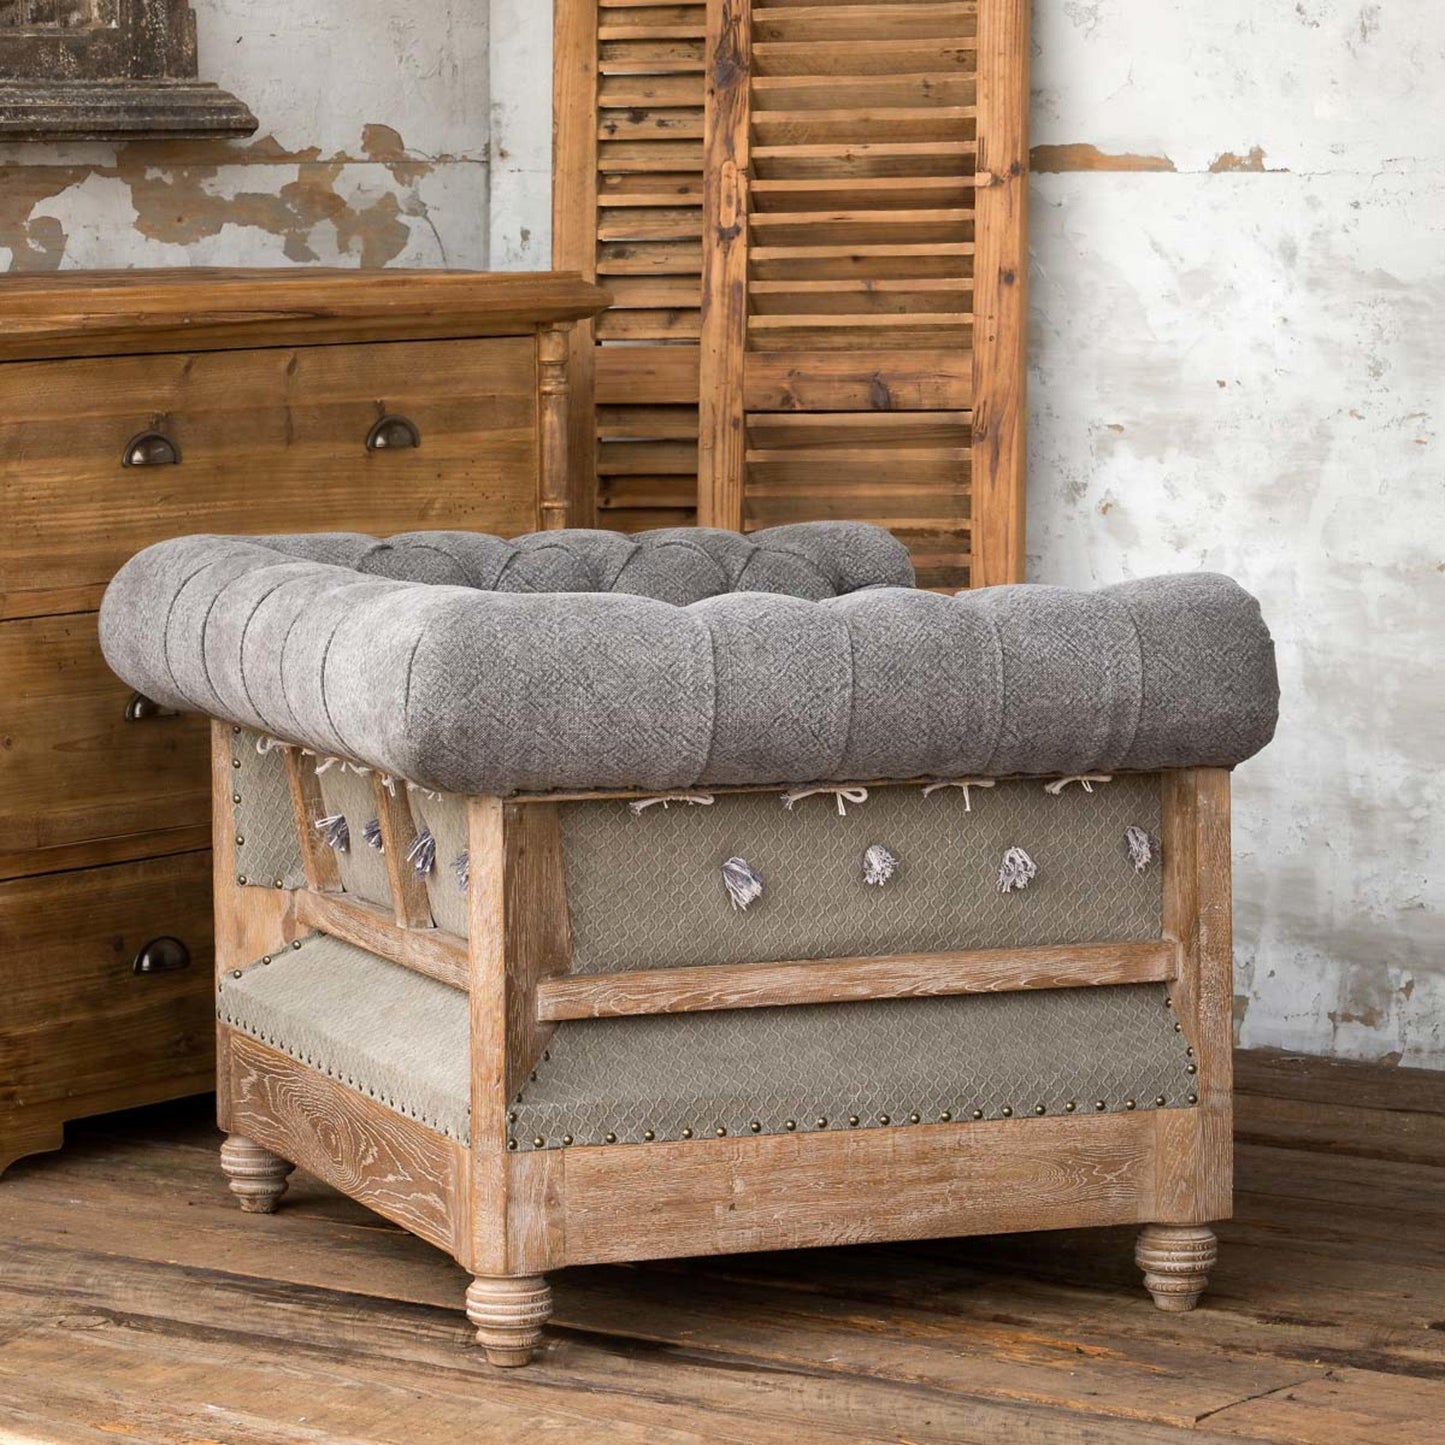 the-chamiree-chesterfield-chair-chair-park-hill-5-Threadbare Gypsy Soul